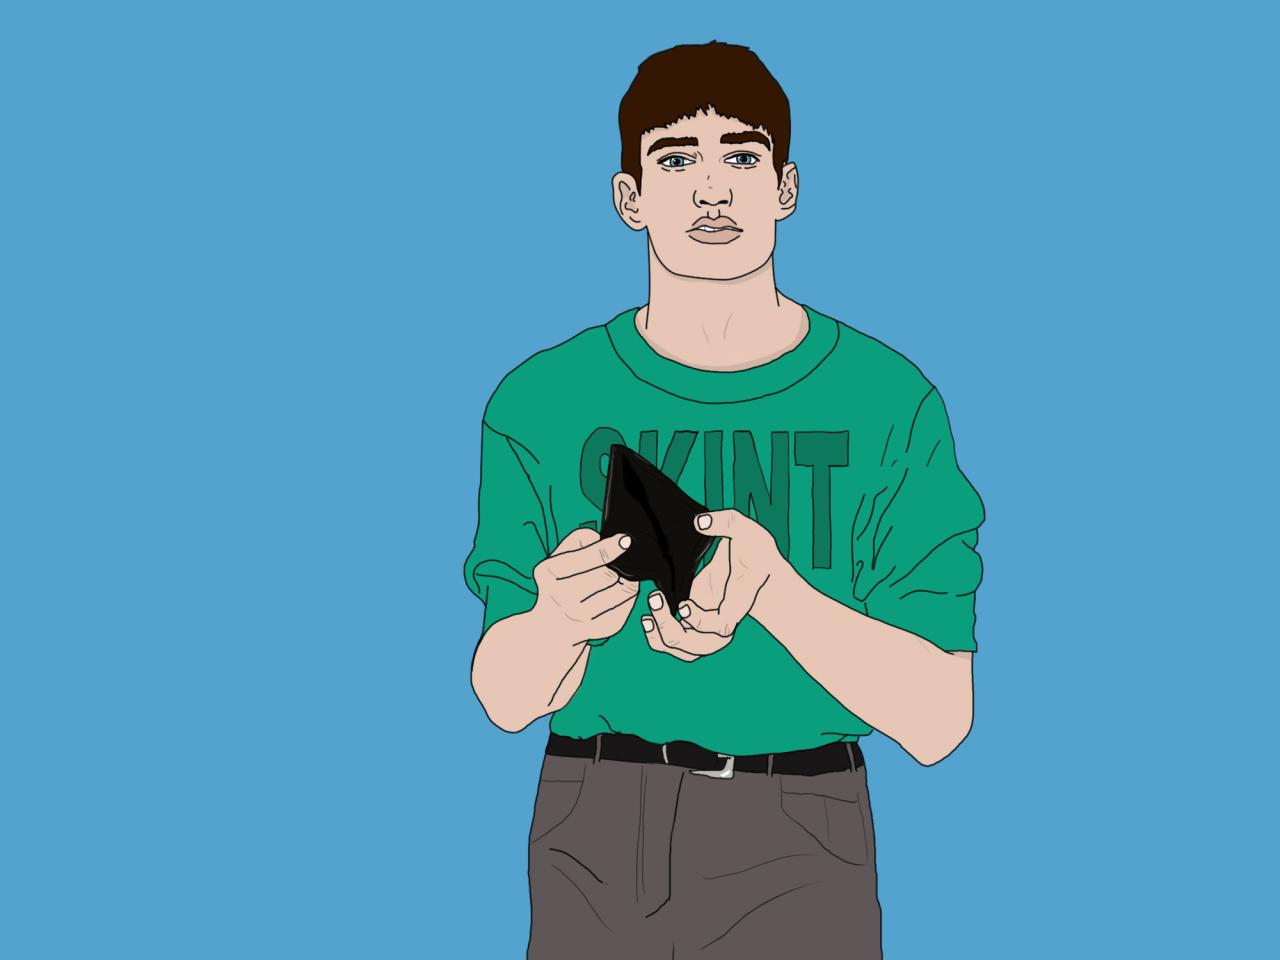 An illustration of a man wearing a T-shirt that says 